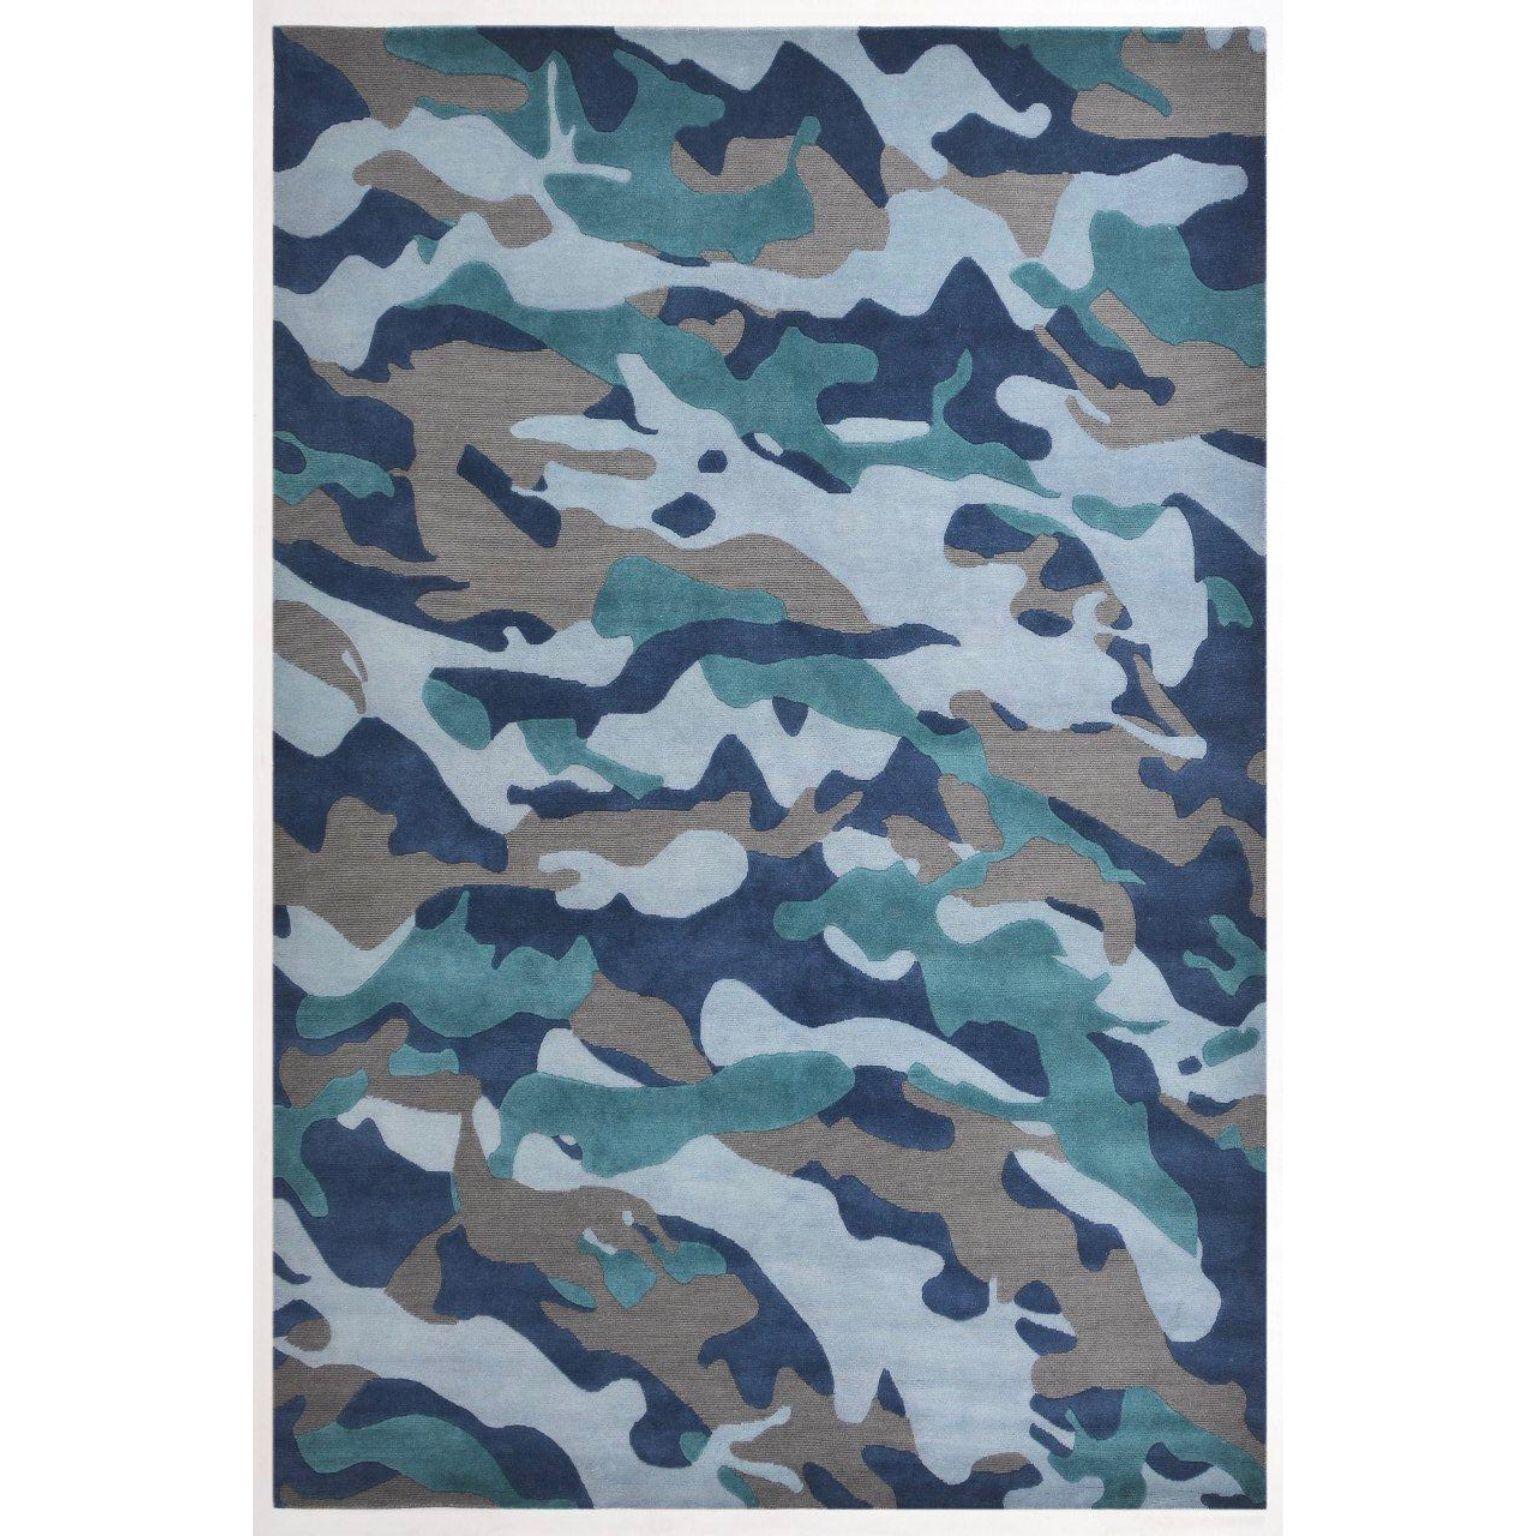 Camo Large rug by Art & Loom
Dimensions: D304.8 x H426.7 cm
Materials: 100% New Zealand wool
Quality (Knots per Inch): 60
Also available in different dimensions.

Samantha Gallacher has always had a keen eye for aesthetics, drawing inspiration